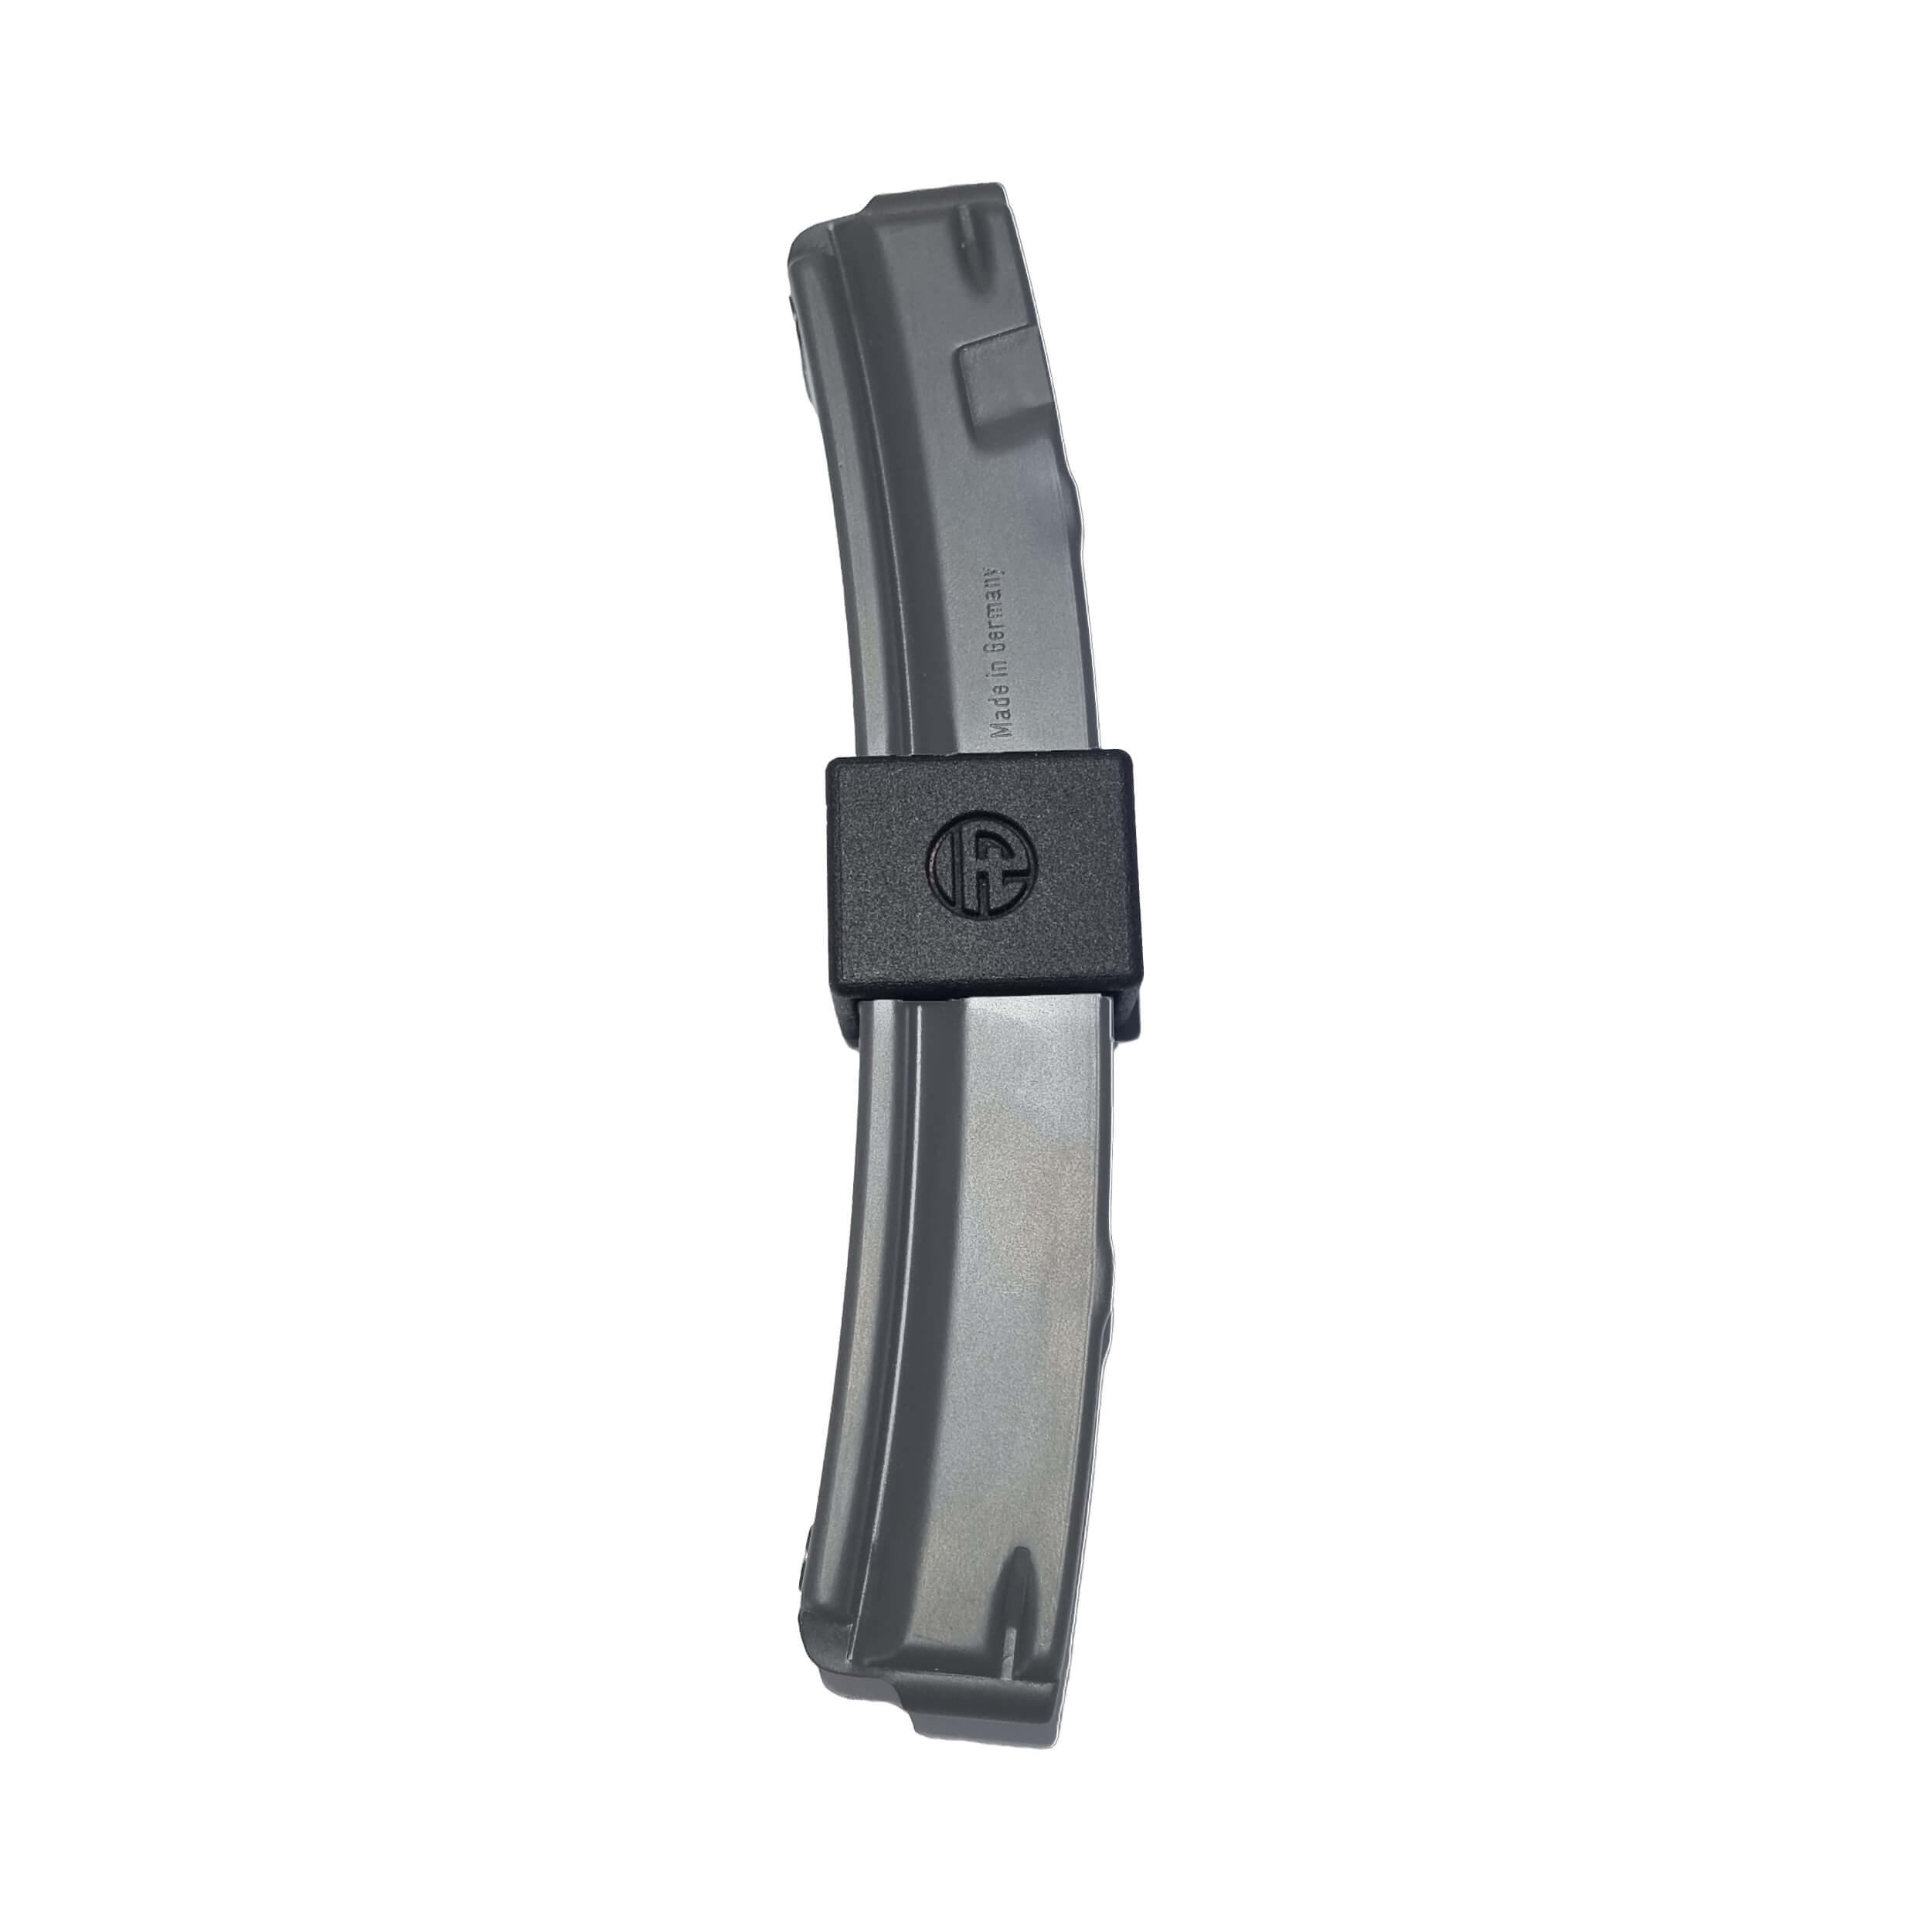 ISSProtectiontrade Magazine Coupler for MP5 Magazines